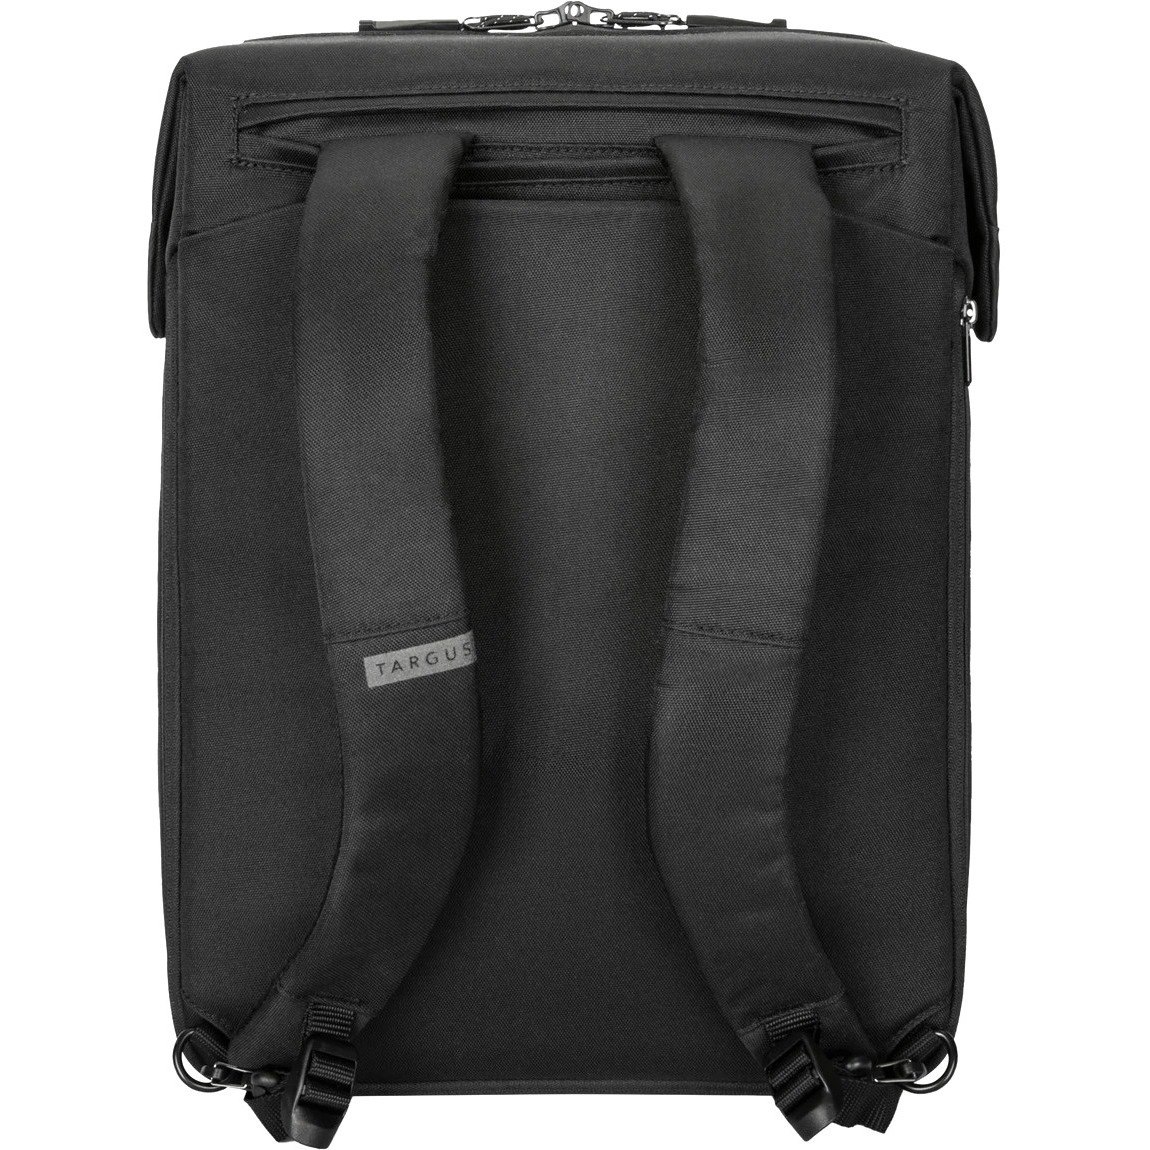 Targus Work+ TBB609GL Carrying Case (Backpack/Tote) for 38.1 cm (15") to 40.6 cm (16") Notebook - Black